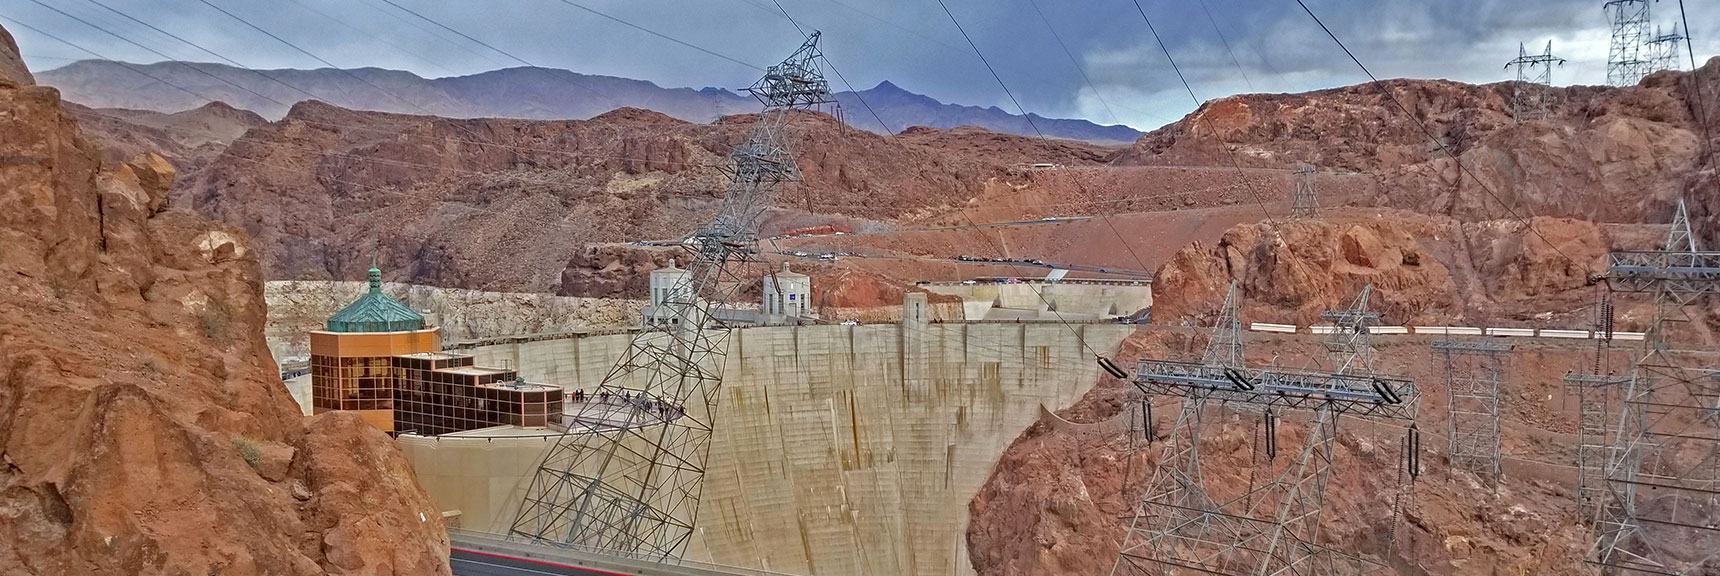 Hoover Dam from the Top of the Parking Area | Historic Railroad Trail | Lake Mead National Recreation Area, Nevada